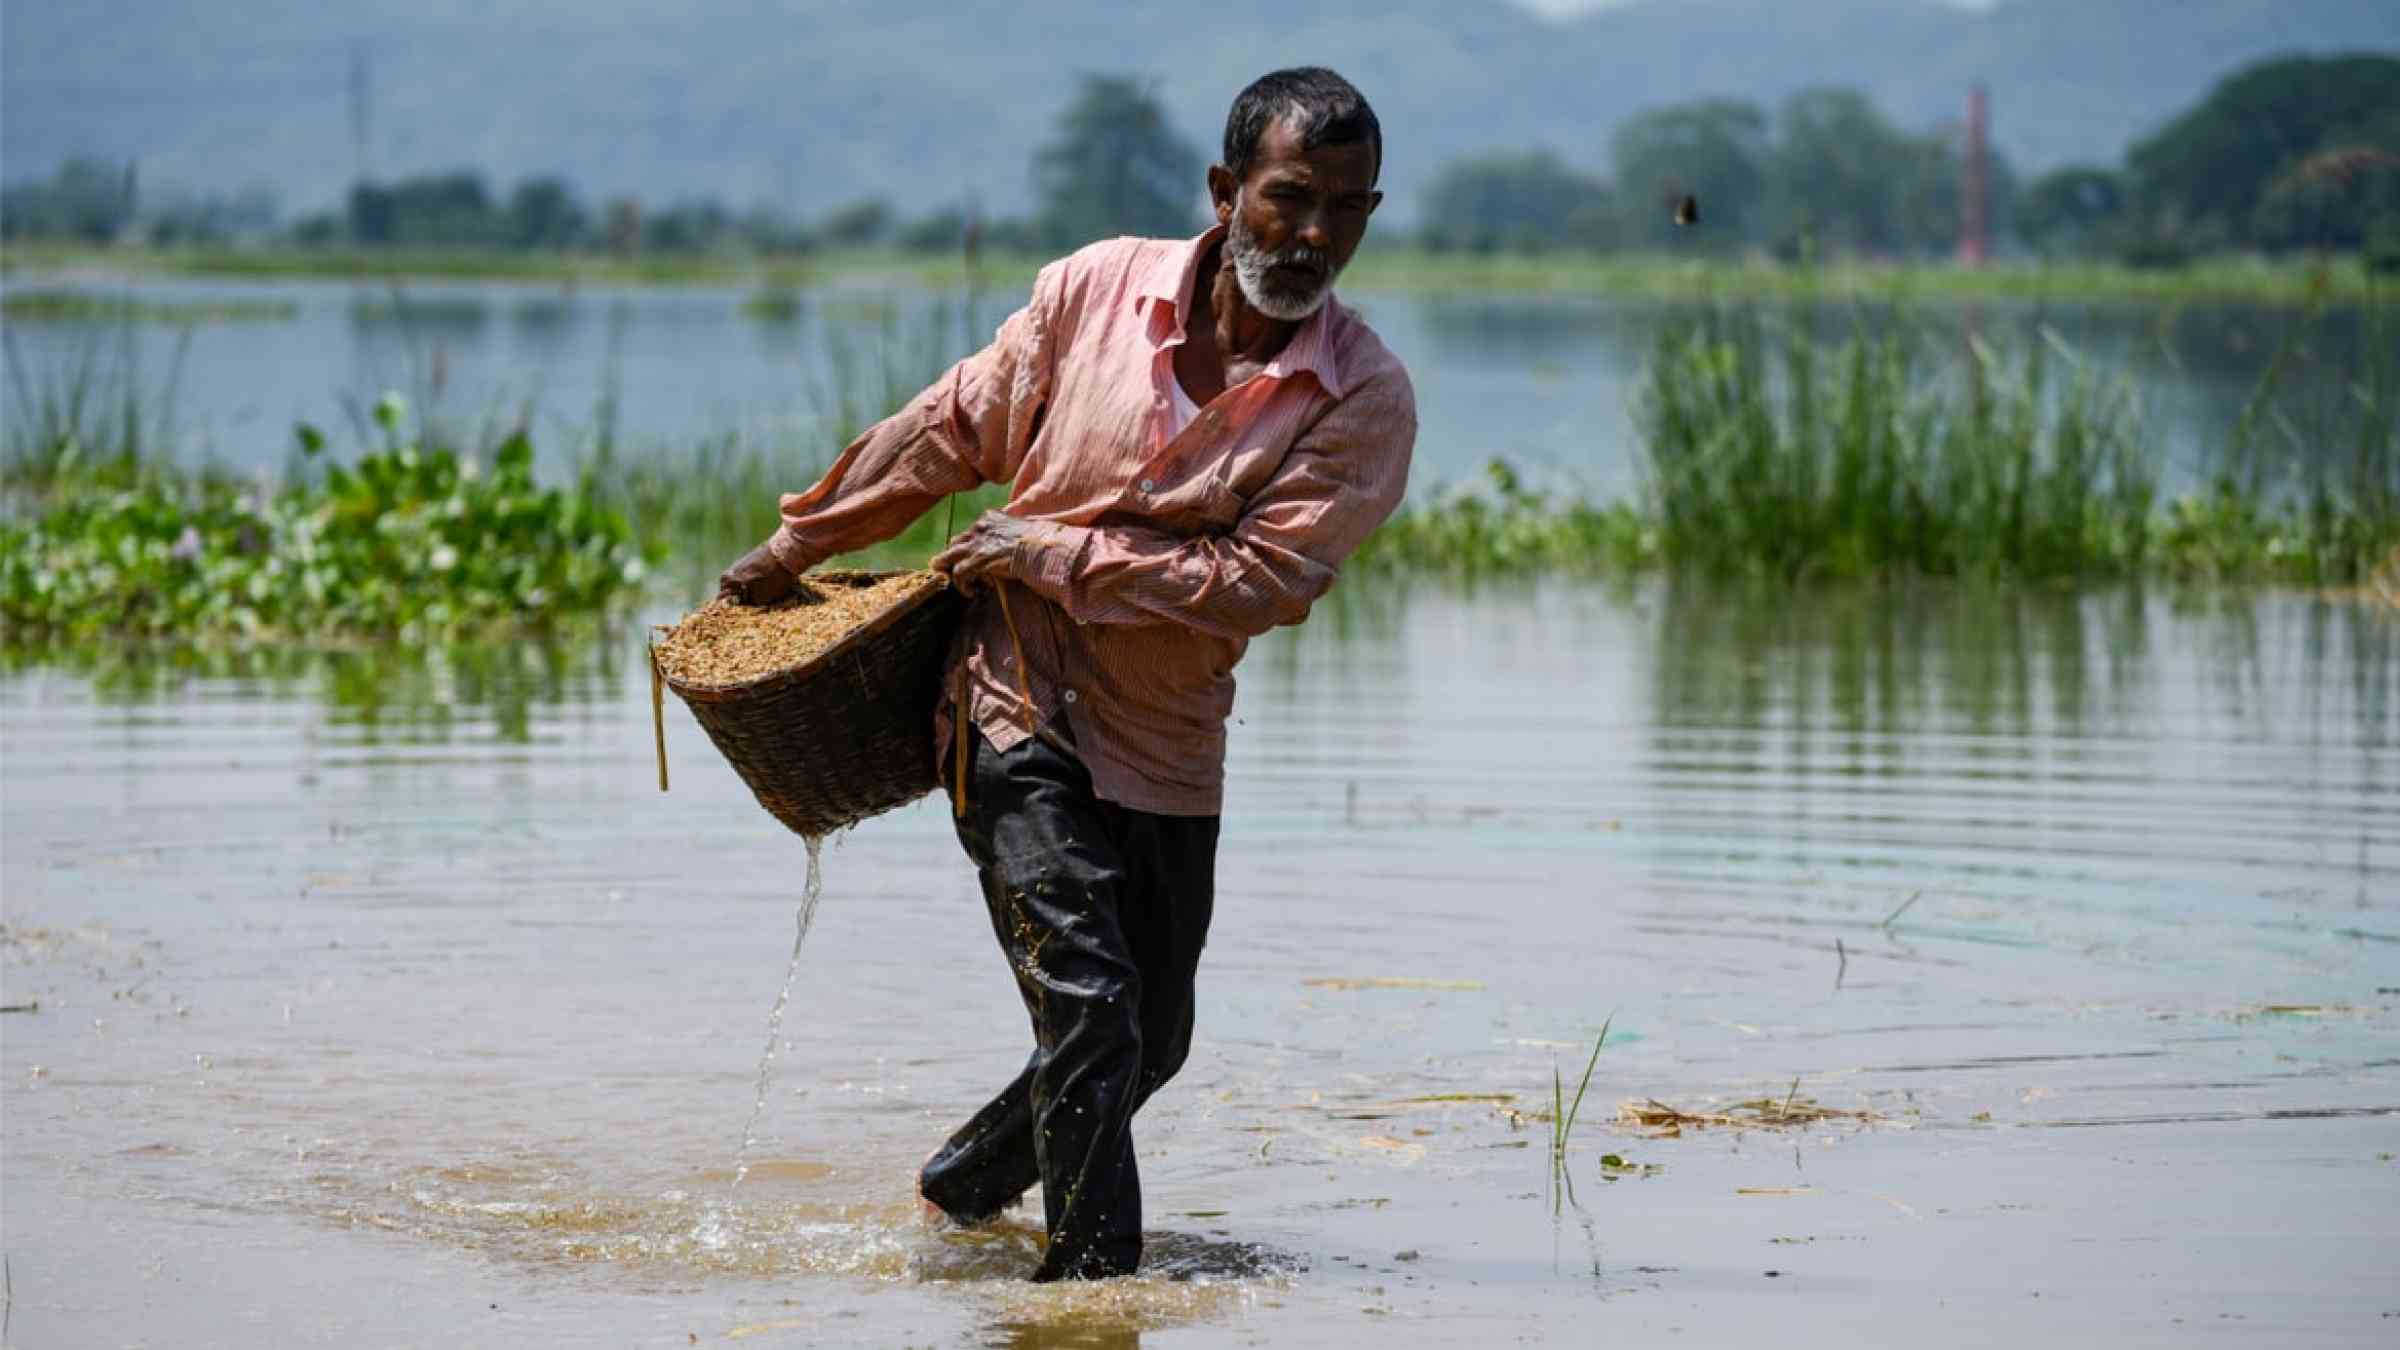 A farmer carries paddy wade through flood water in Assam, India (2020)